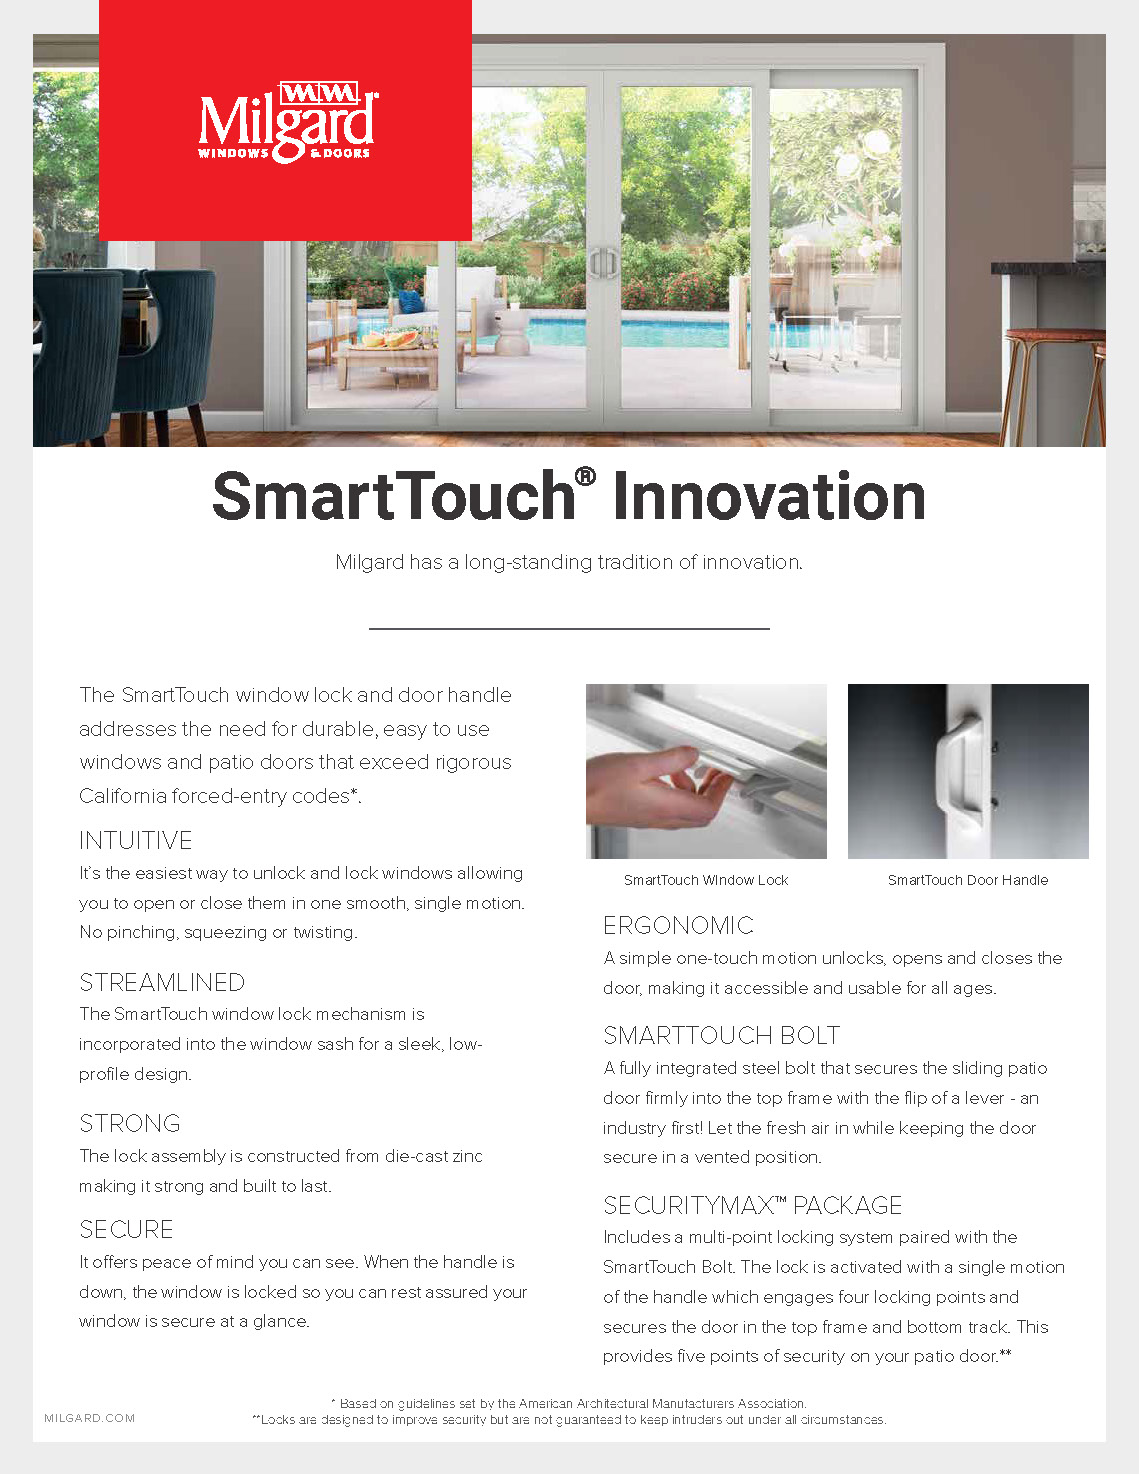 smarttouch_and_security_max_Page_1